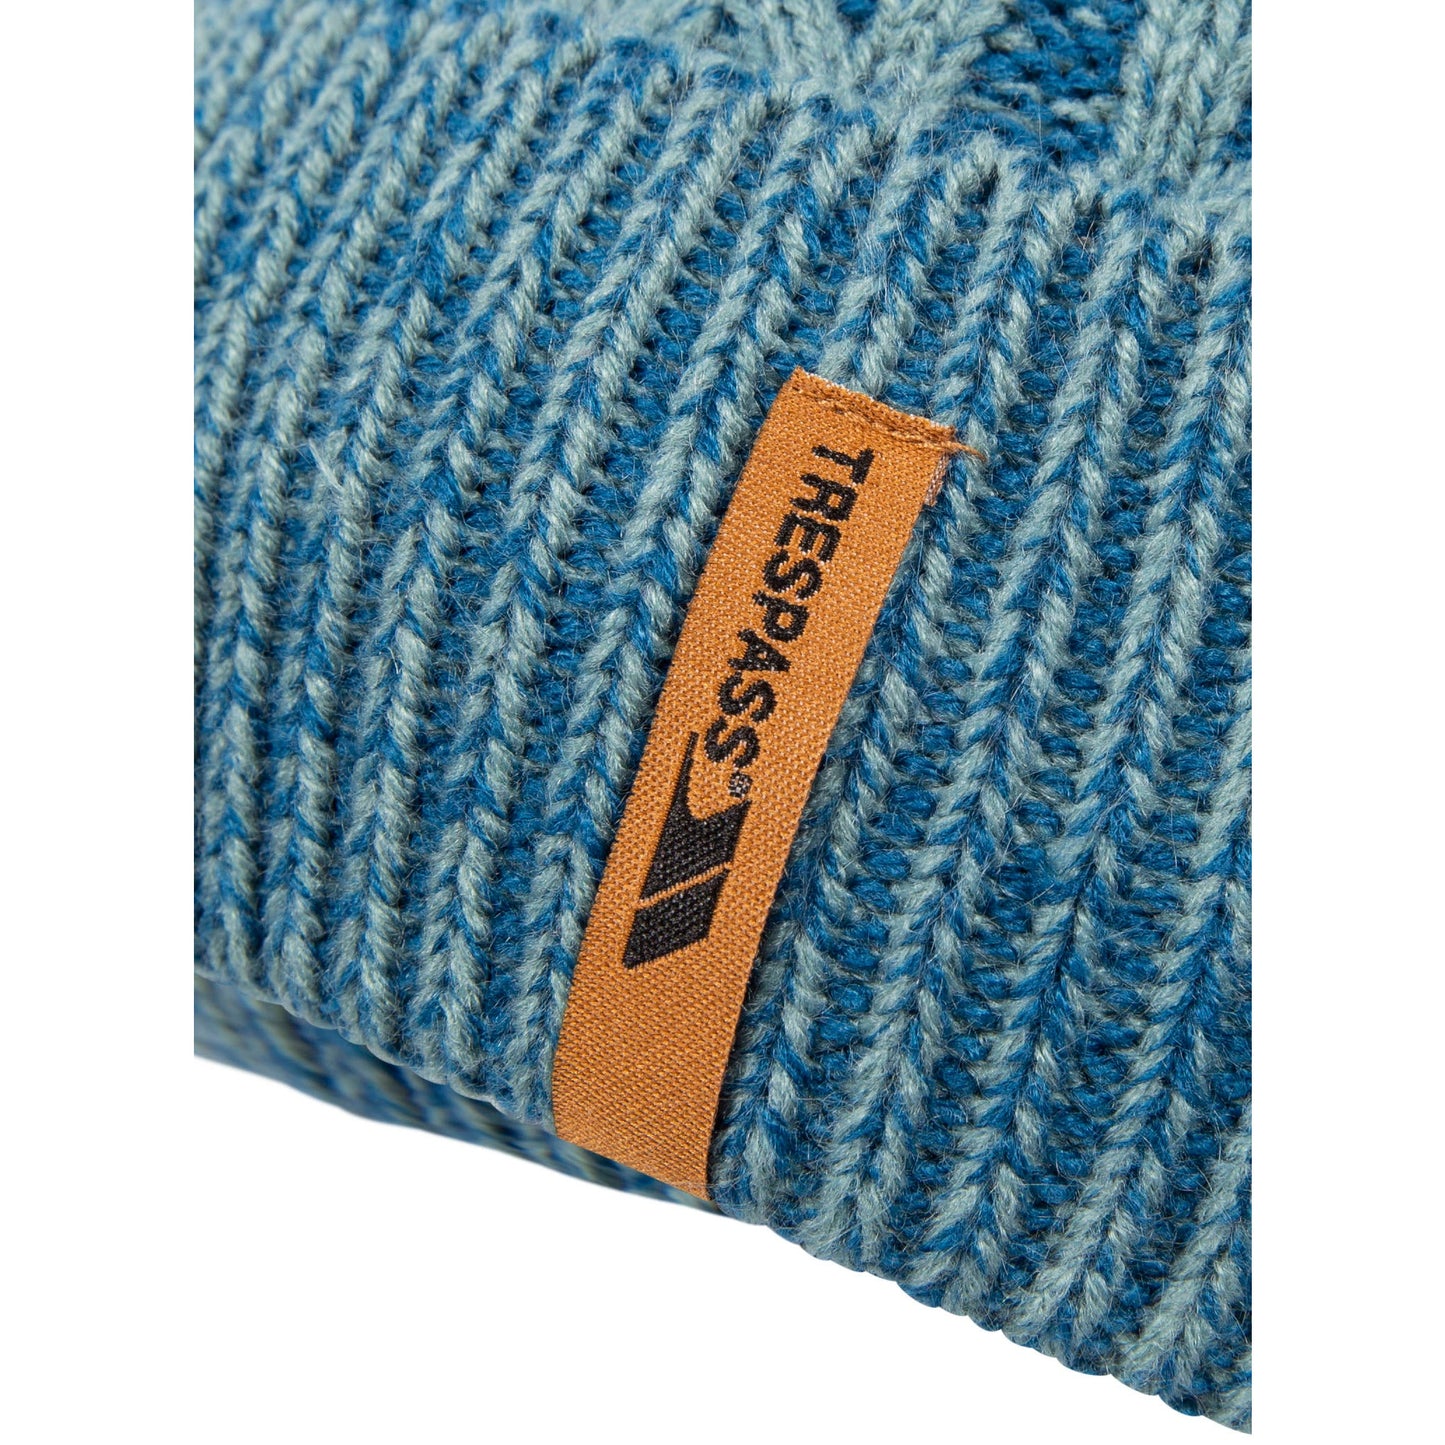 Zindy Womens Knitted Lined Hat in Rich Teal